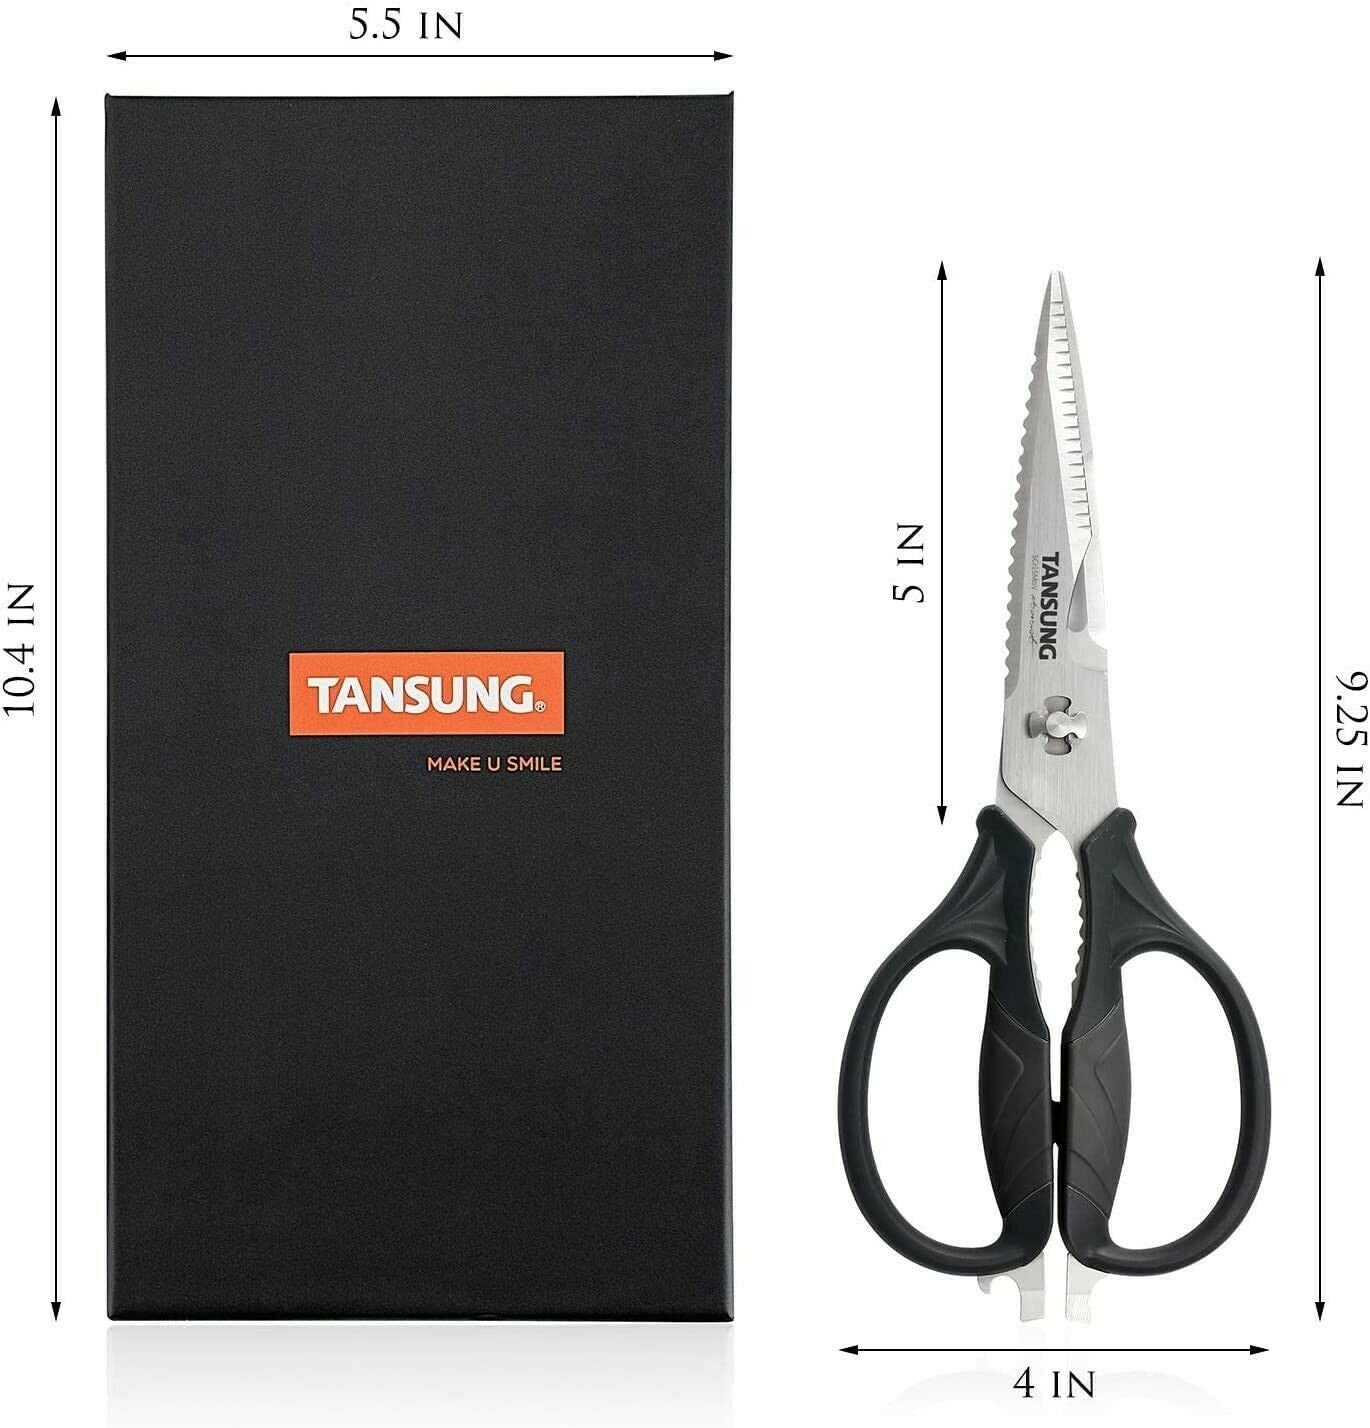 Tansung Kitchen Shears Review 